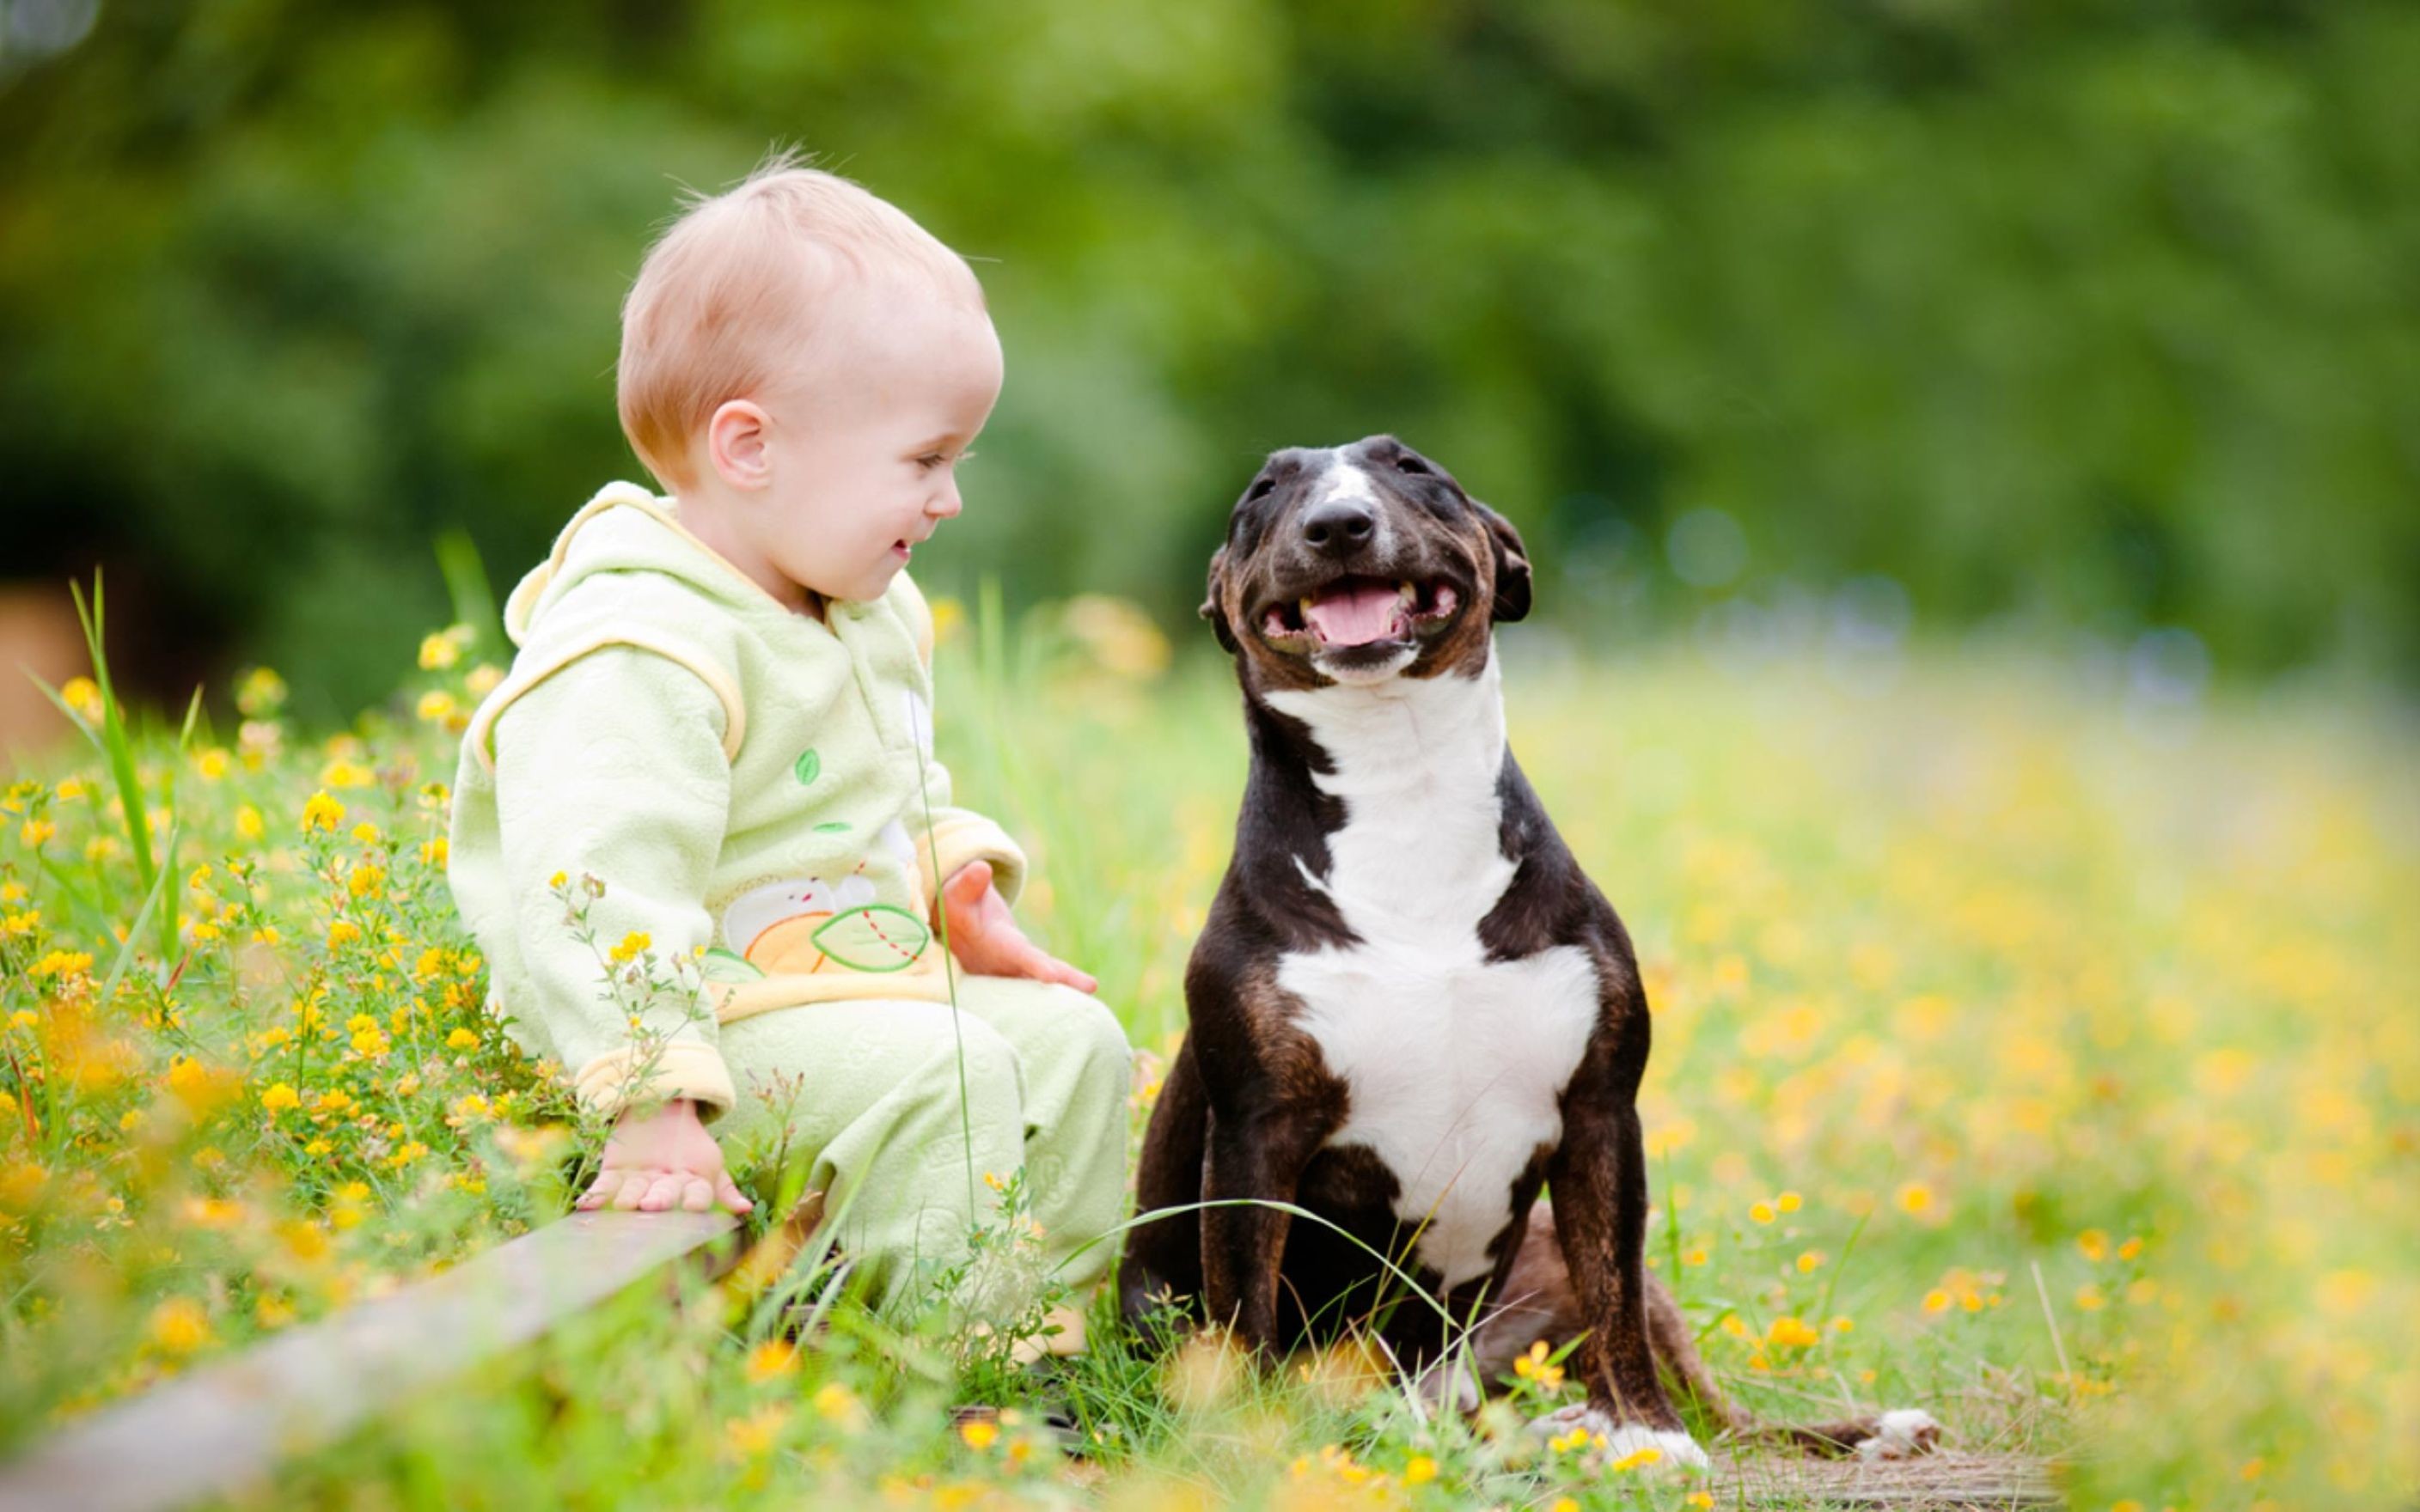 2816x1760 Cute Image of A Small Child And Puppy Wallpaper